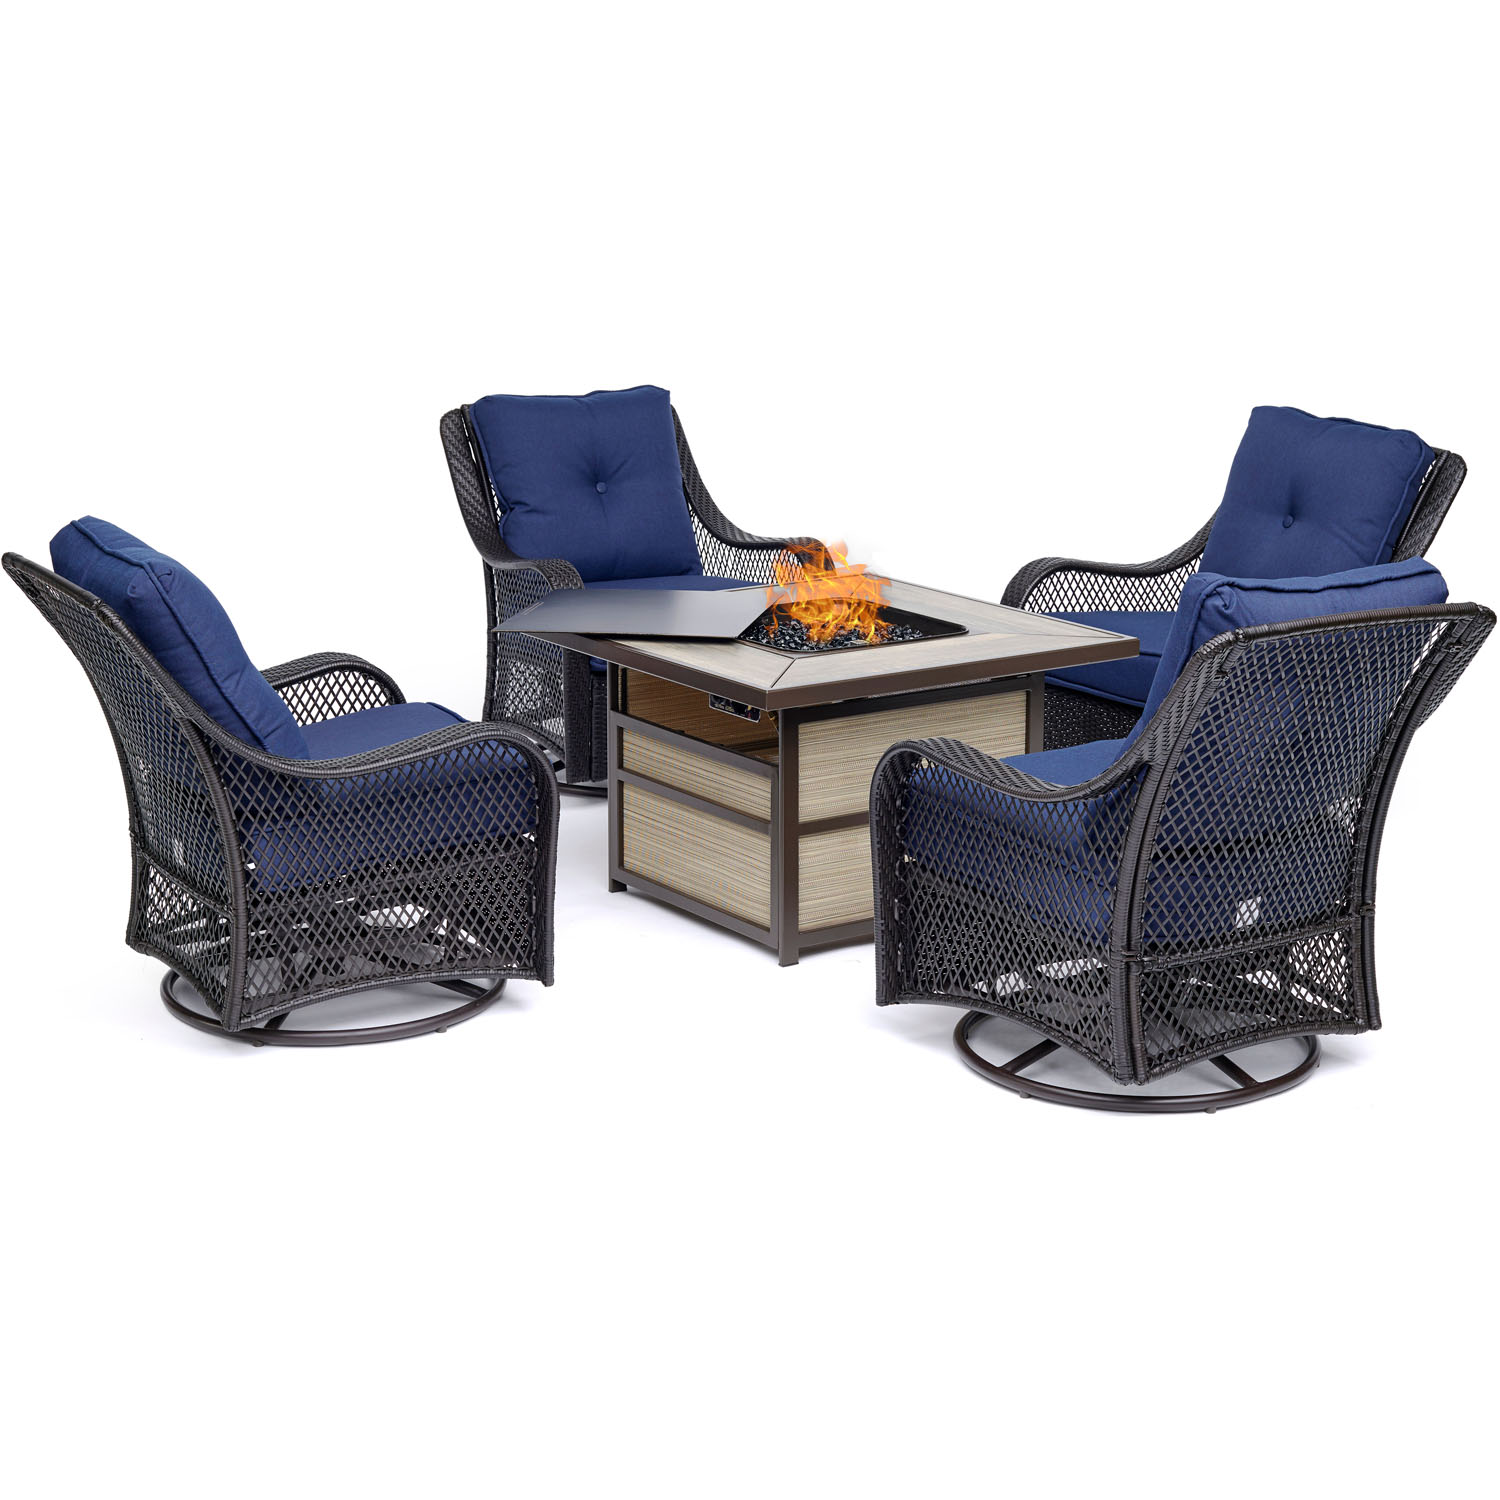 Hanover Orleans 5-Piece Fire Pit Chat Set with a 40,000 BTU Fire Pit Table and 4 Woven Swivel Gliders in Navy Blue - image 1 of 11